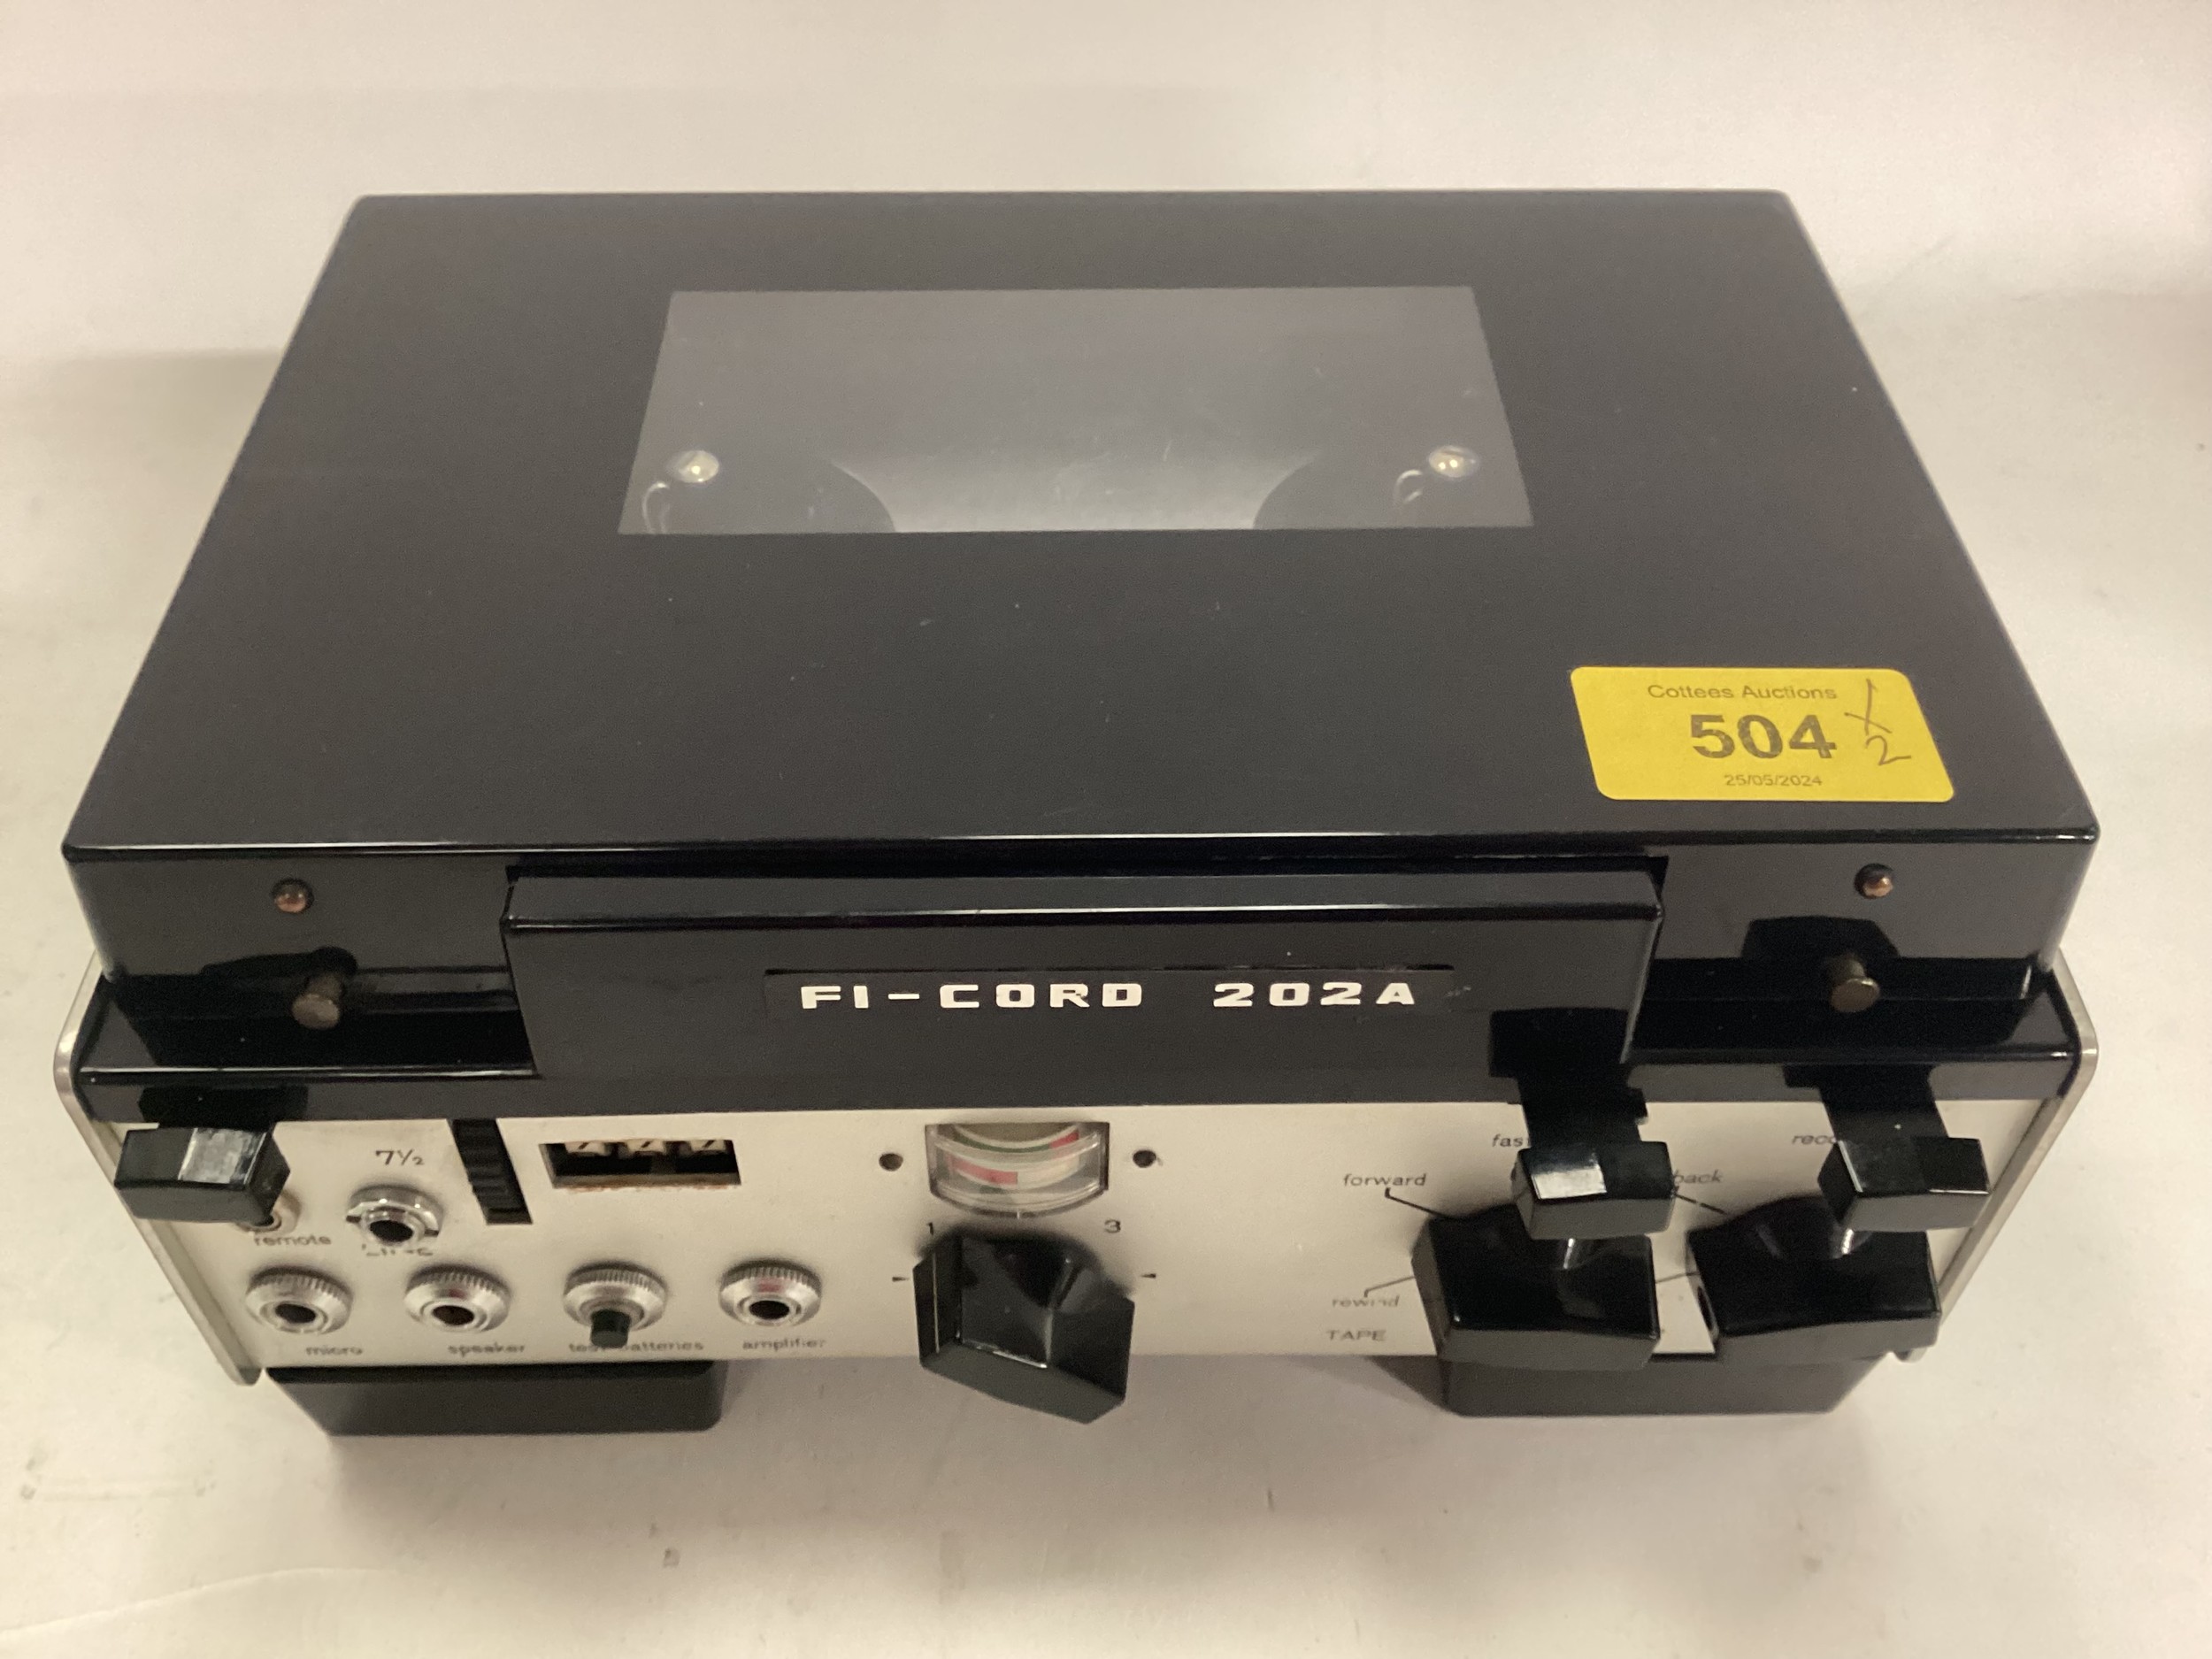 FI-CORD PORTABLE REEL TO REEL TAPE RECORDERS. Here we have 2 tape recorders model No. 202A. One - Image 7 of 8